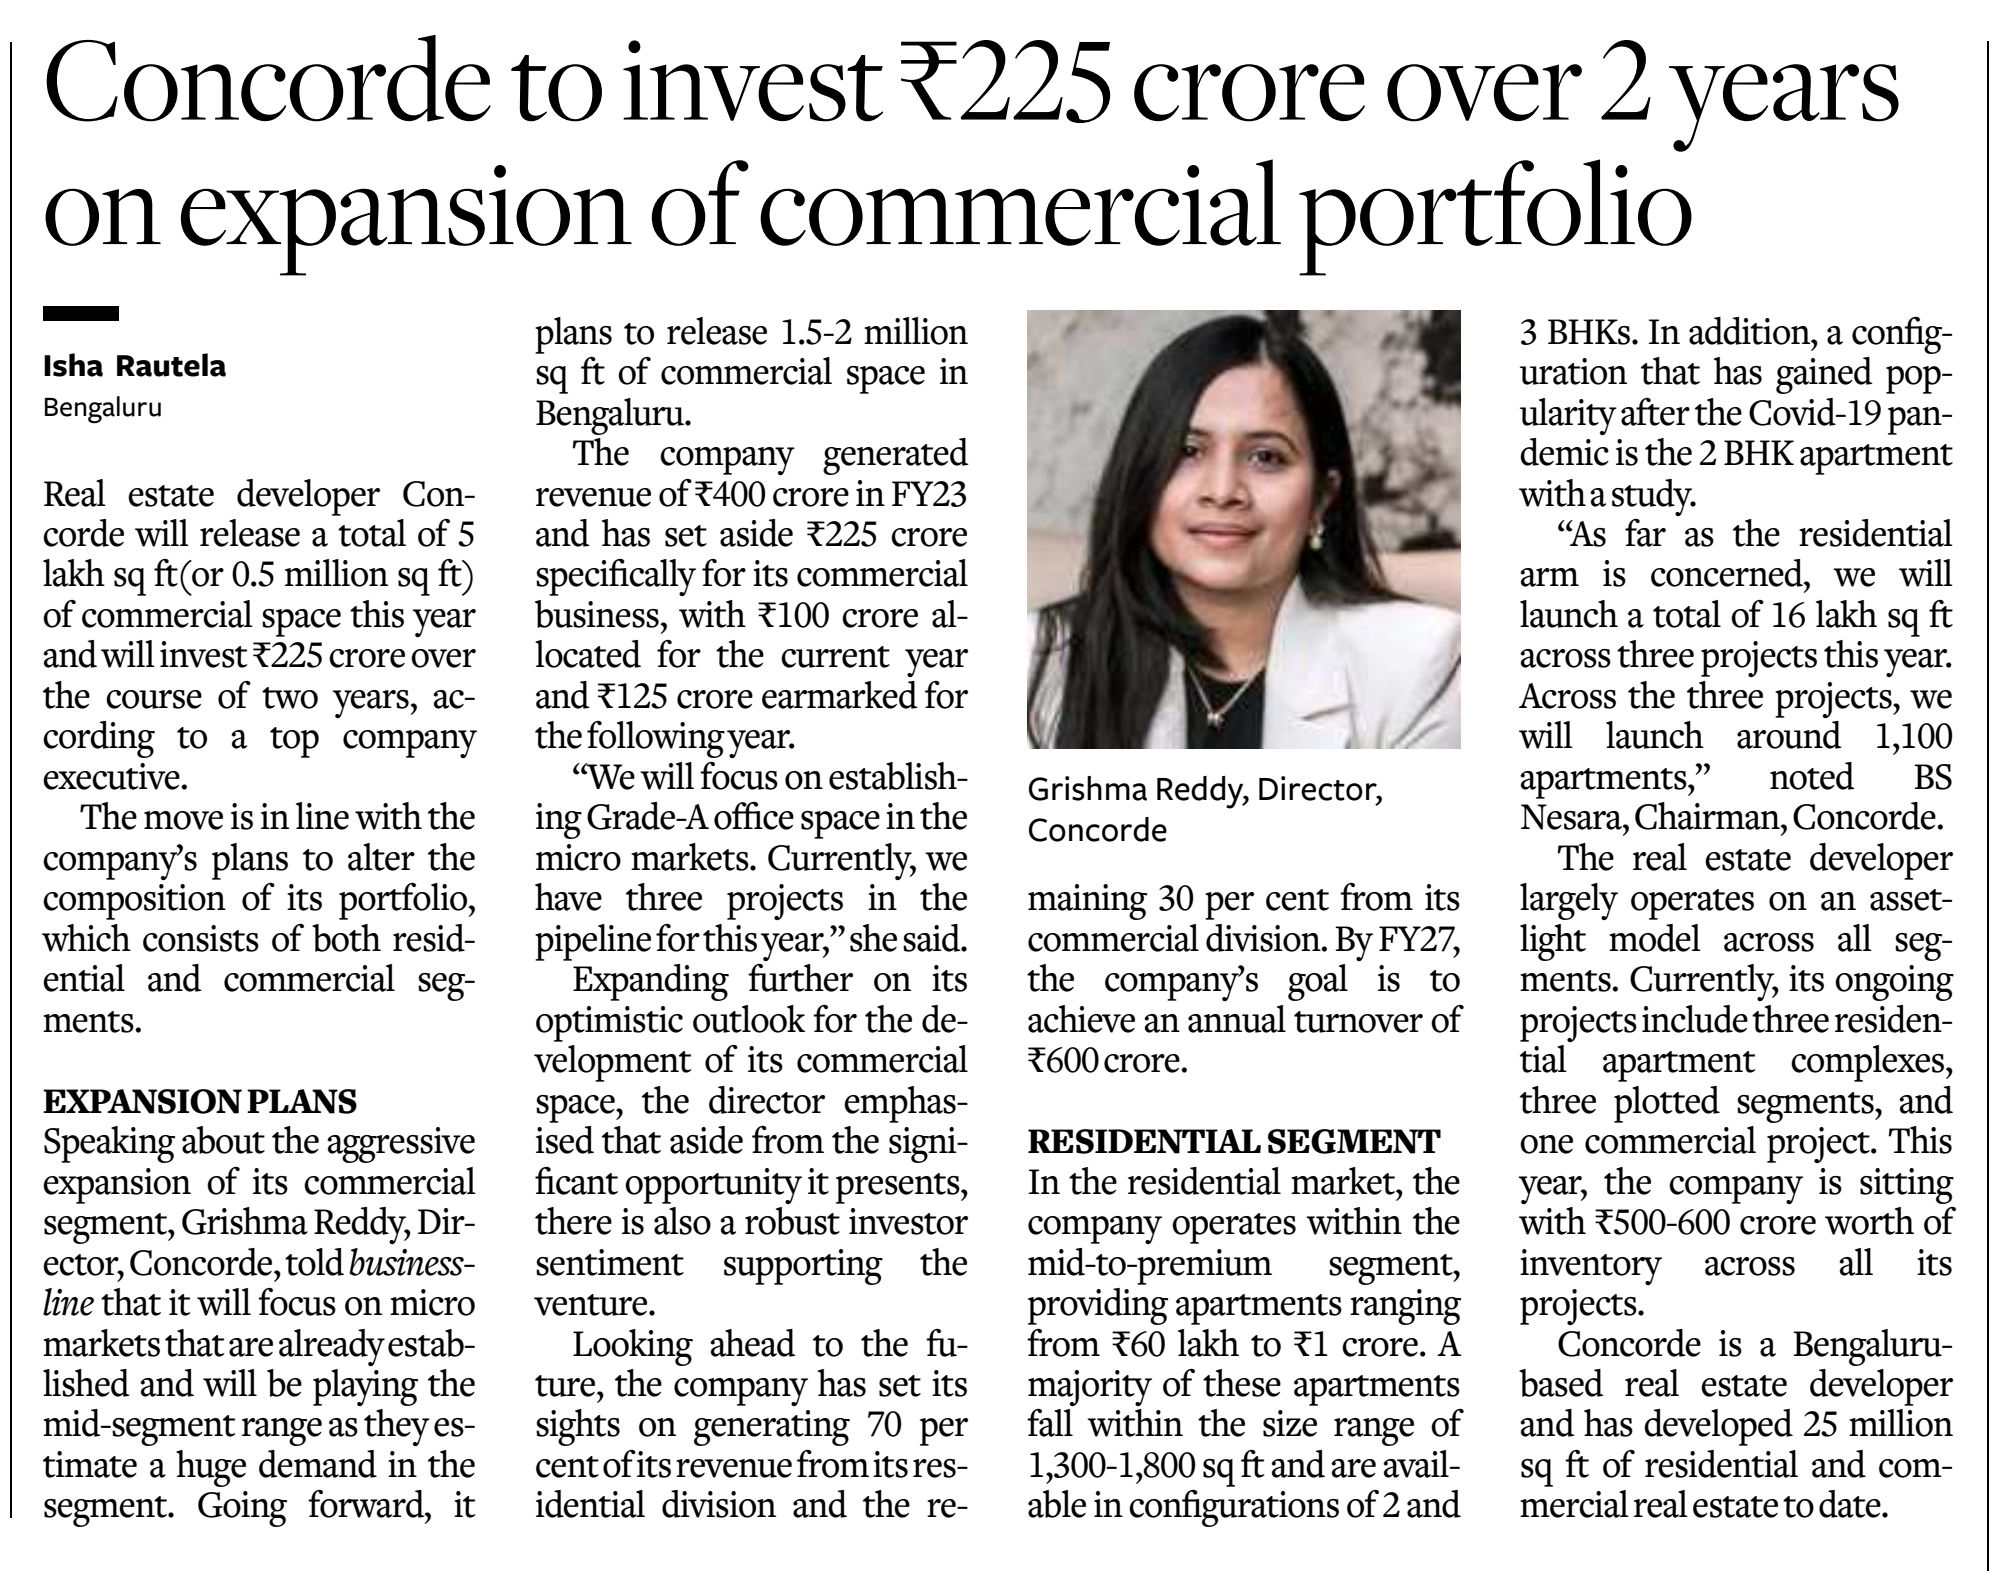 Concorde to invest 225 crore over 2 years on expansion of commercial portfolio.jpg